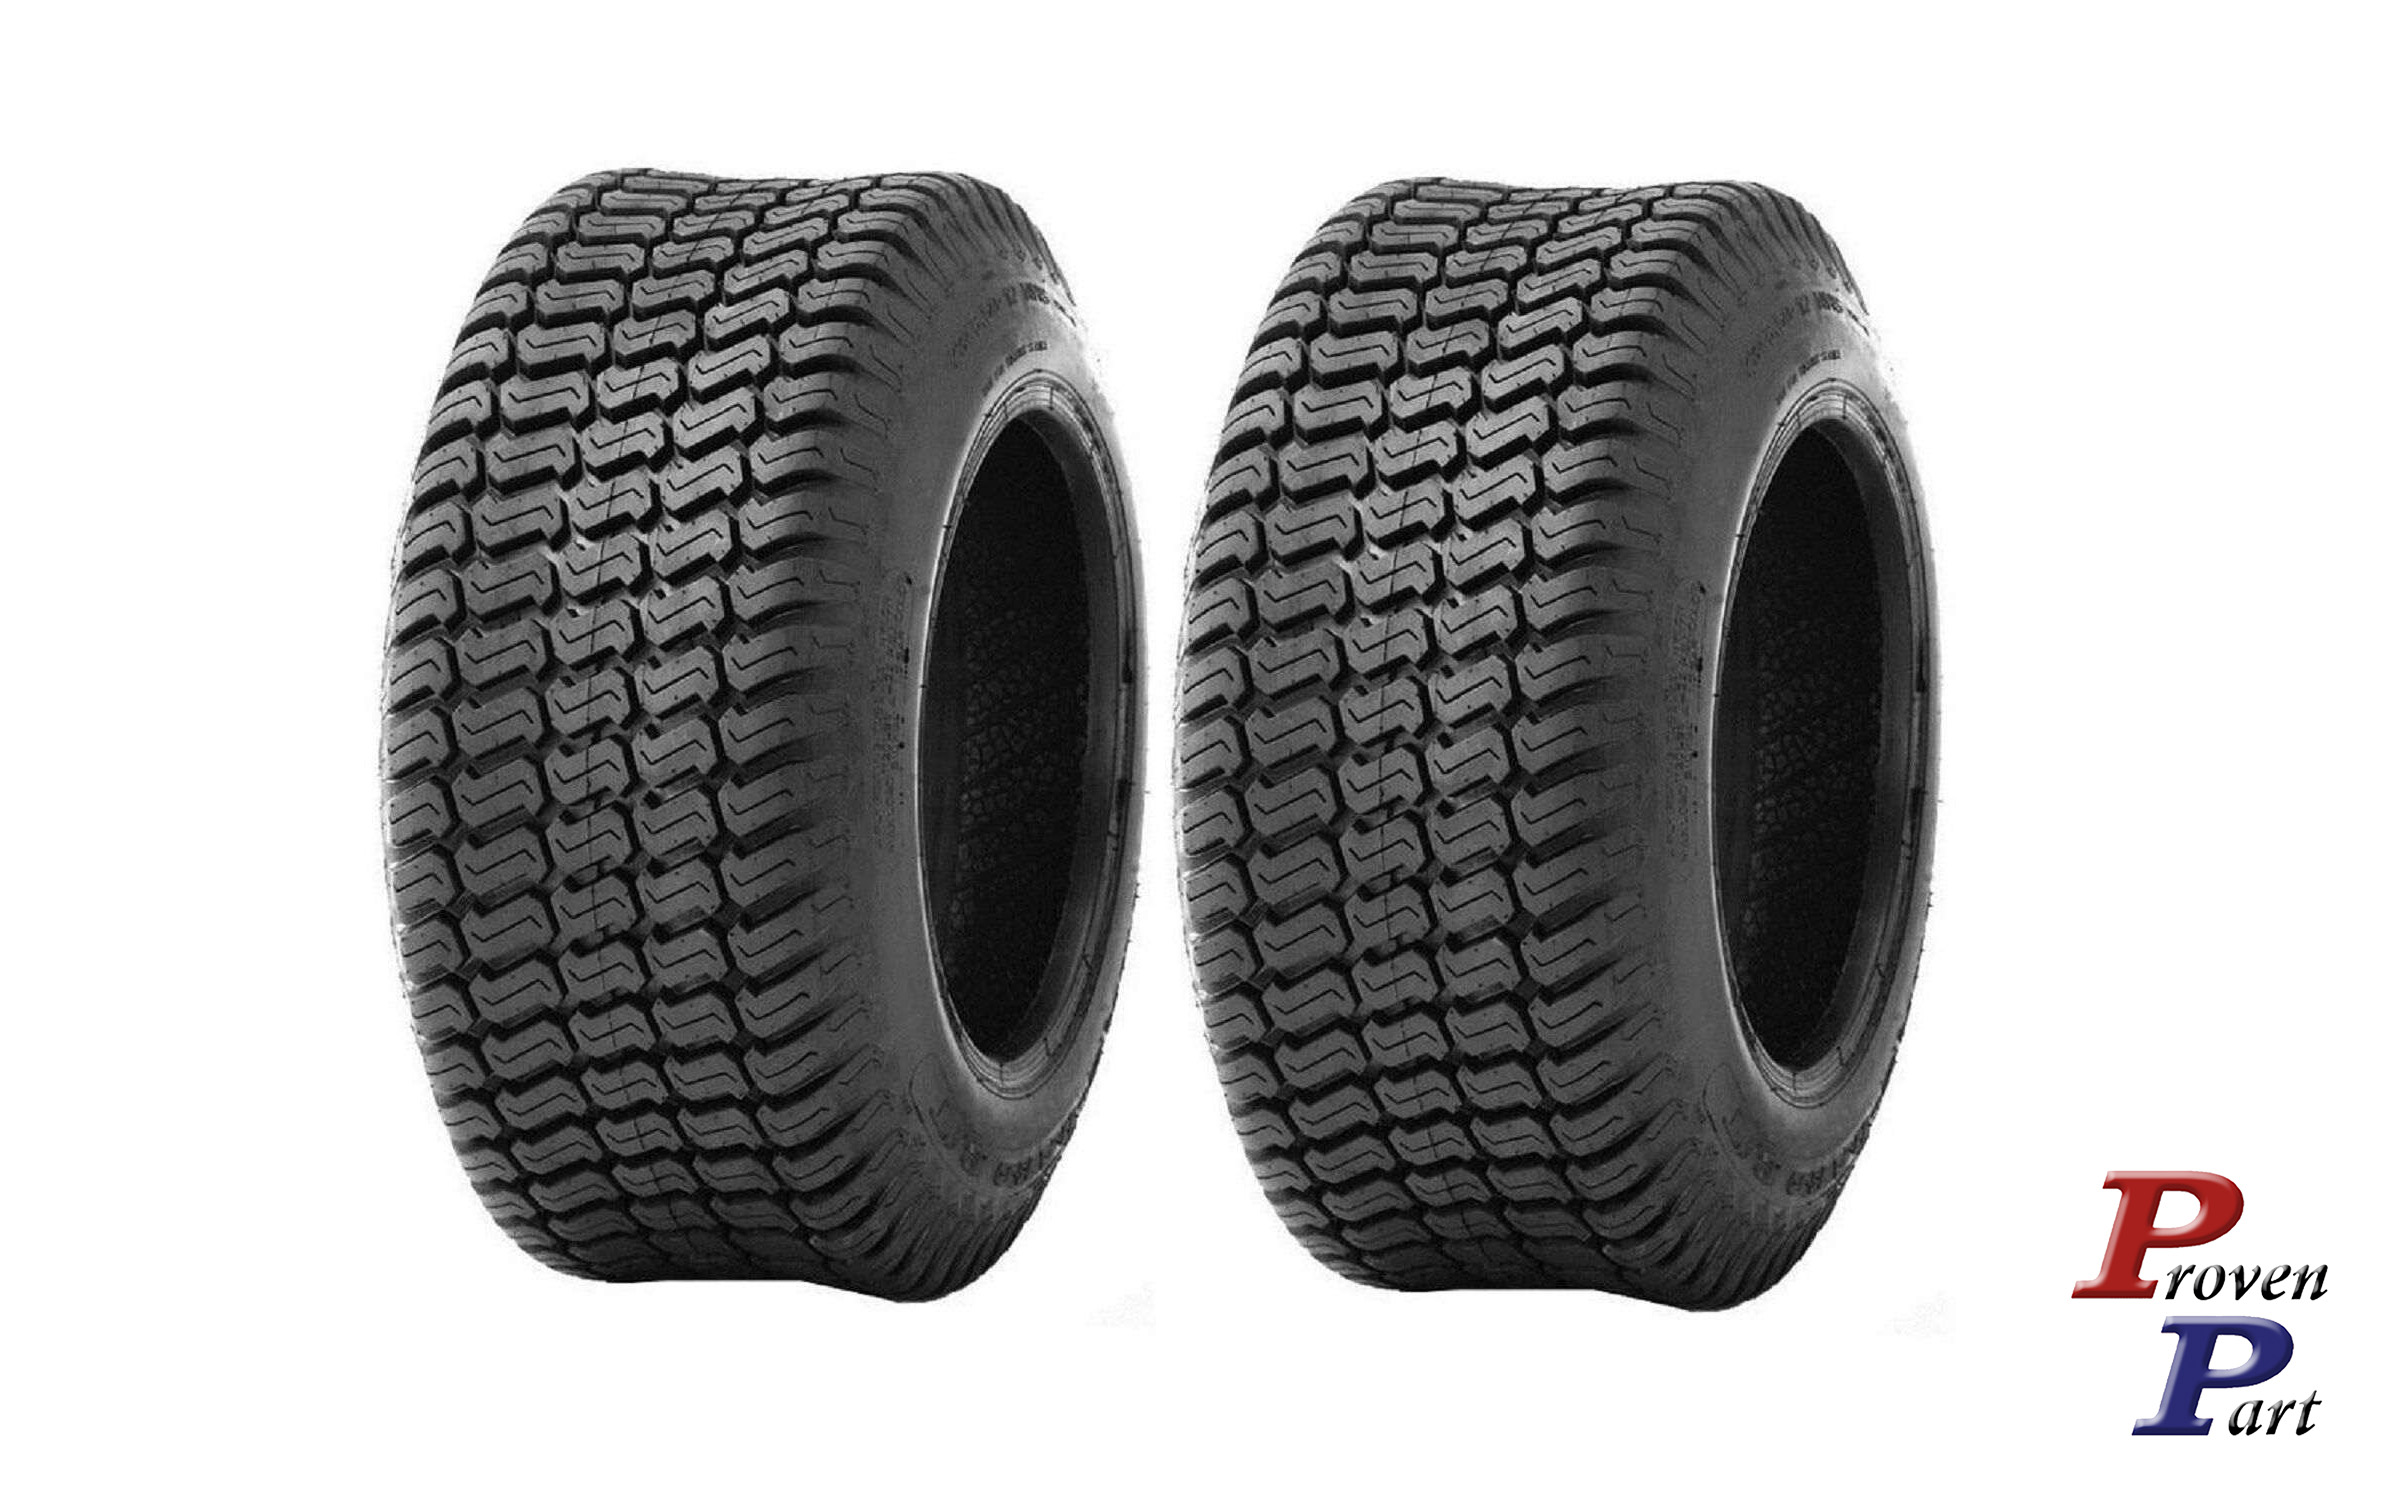 Set of 2 lawn mower tires PROMASTER 15X6.00-6 4 ply tubeless - Click Image to Close